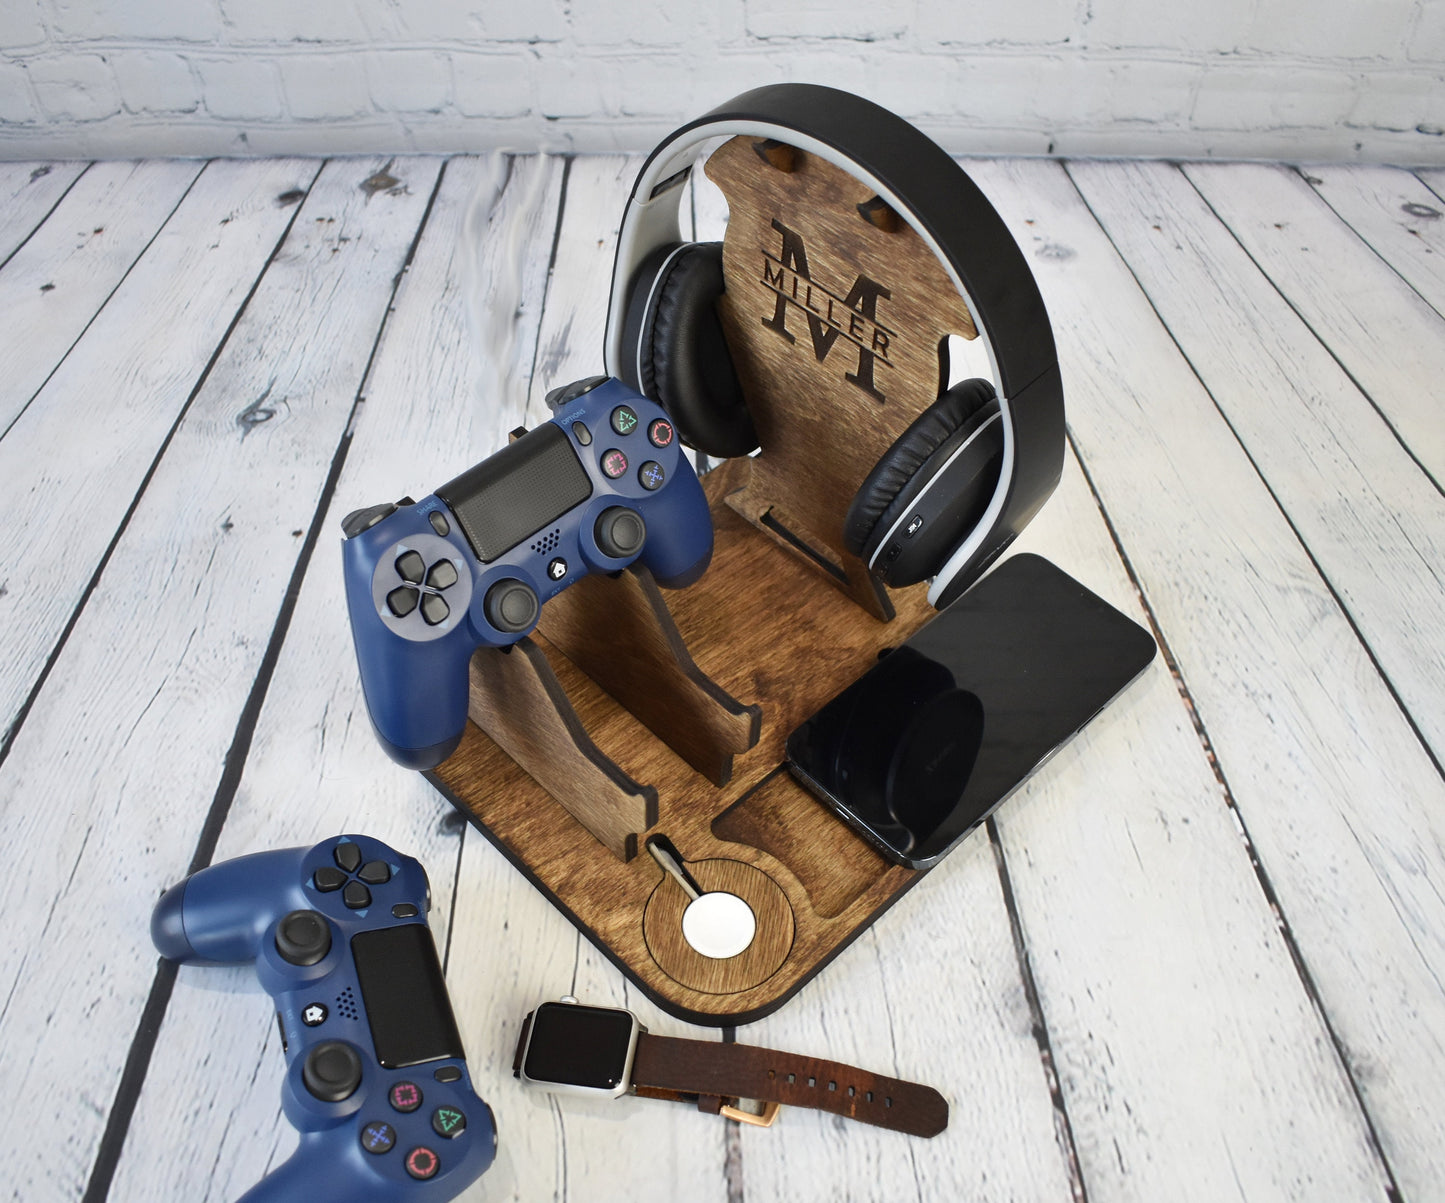 Wireless Headphone and Controller Stand - GS11